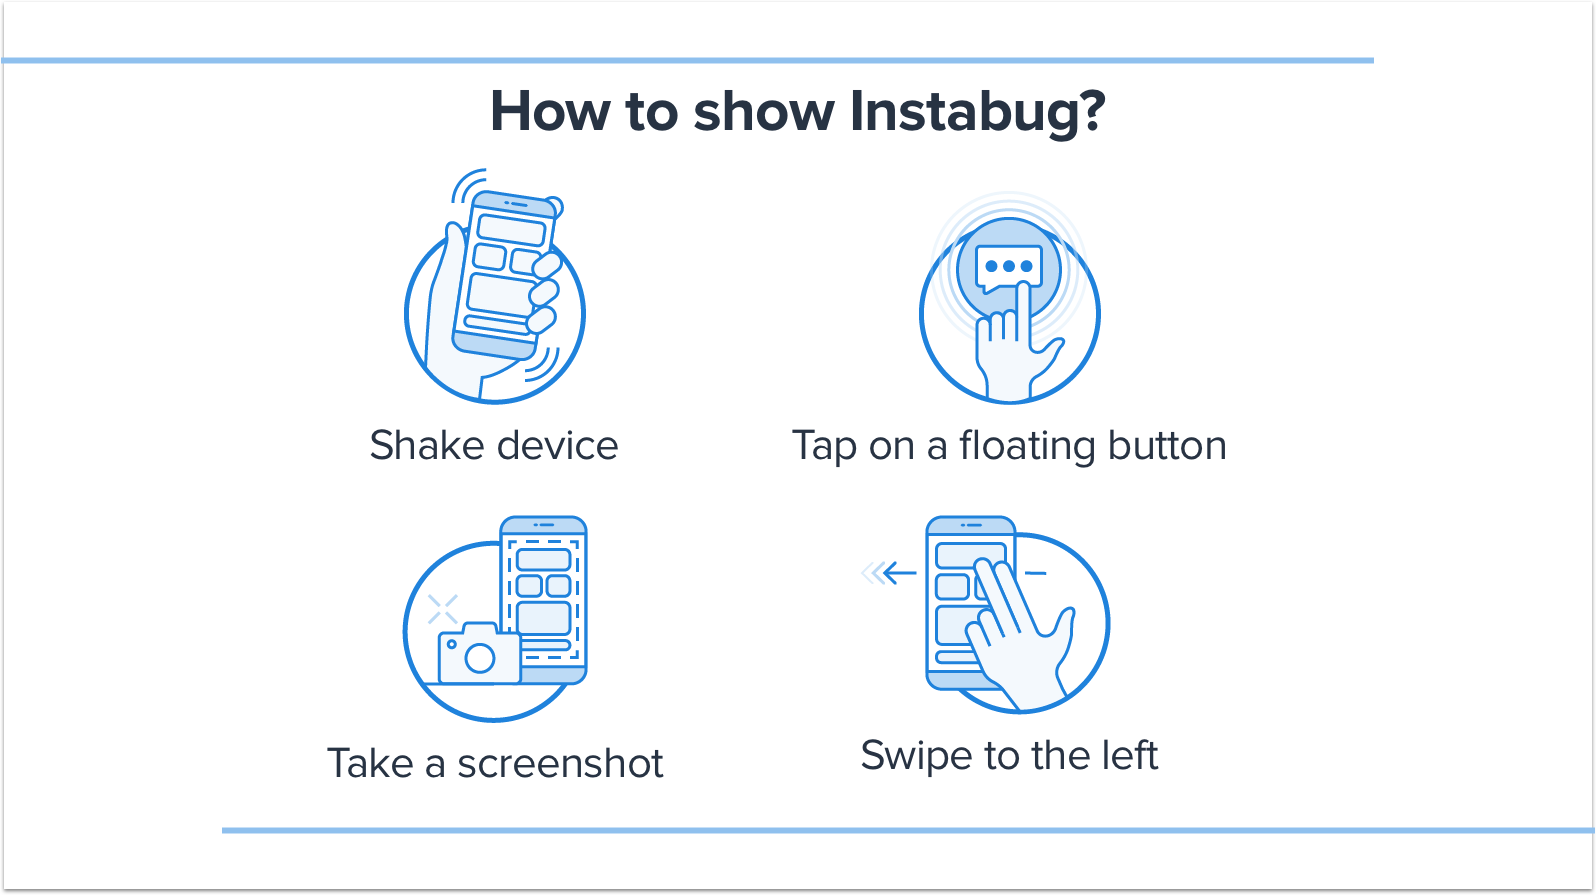 How to show Instabug